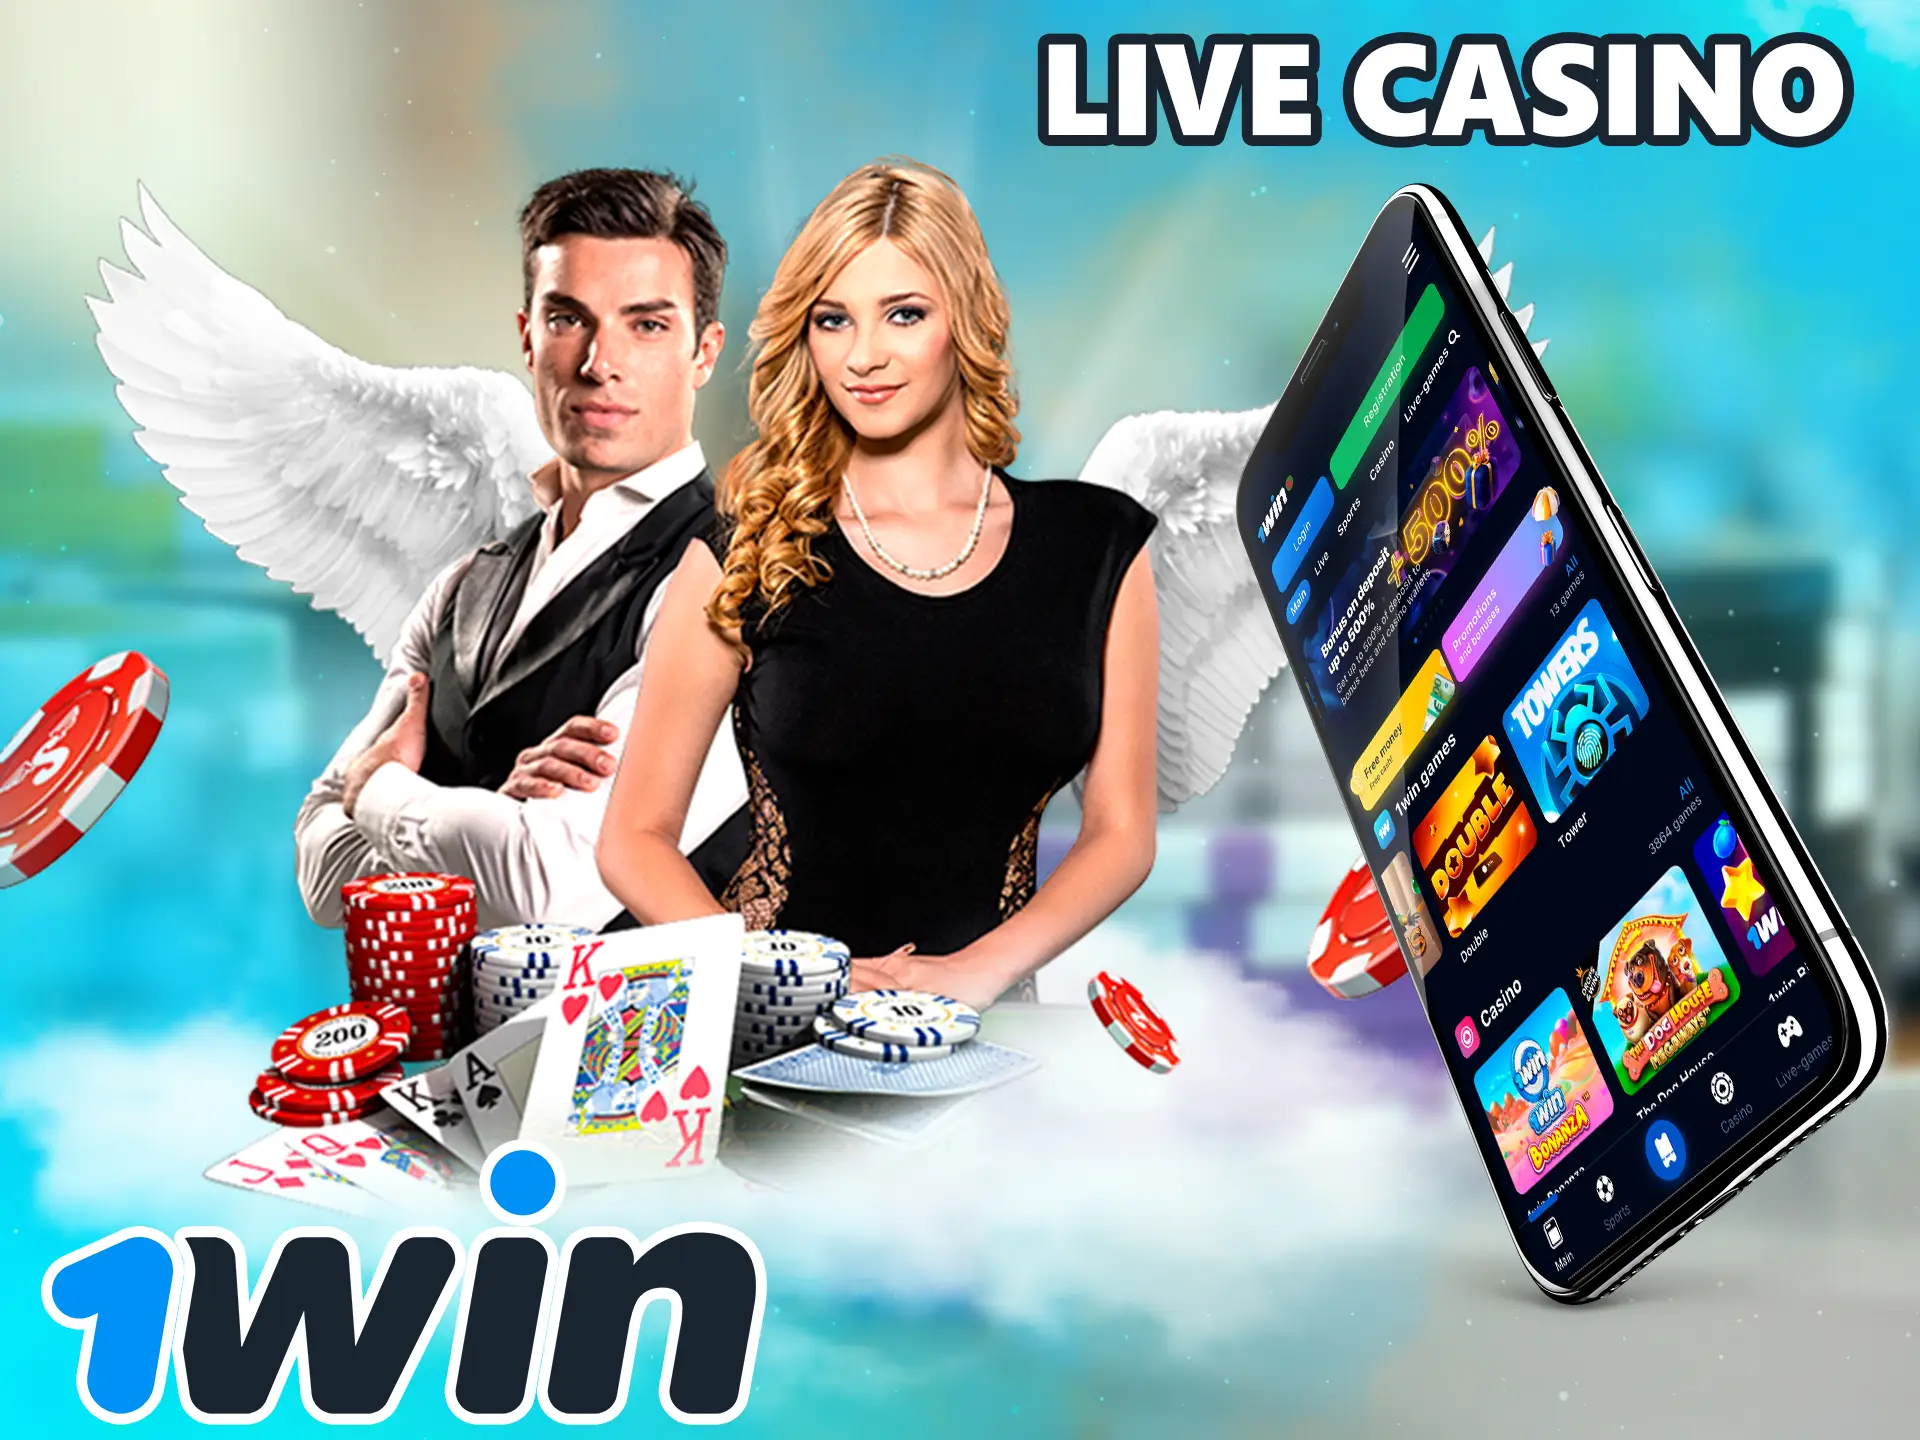 Try your hand at this exciting form of gaming at 1Win Casino, here you will be playing with a real person in real time.